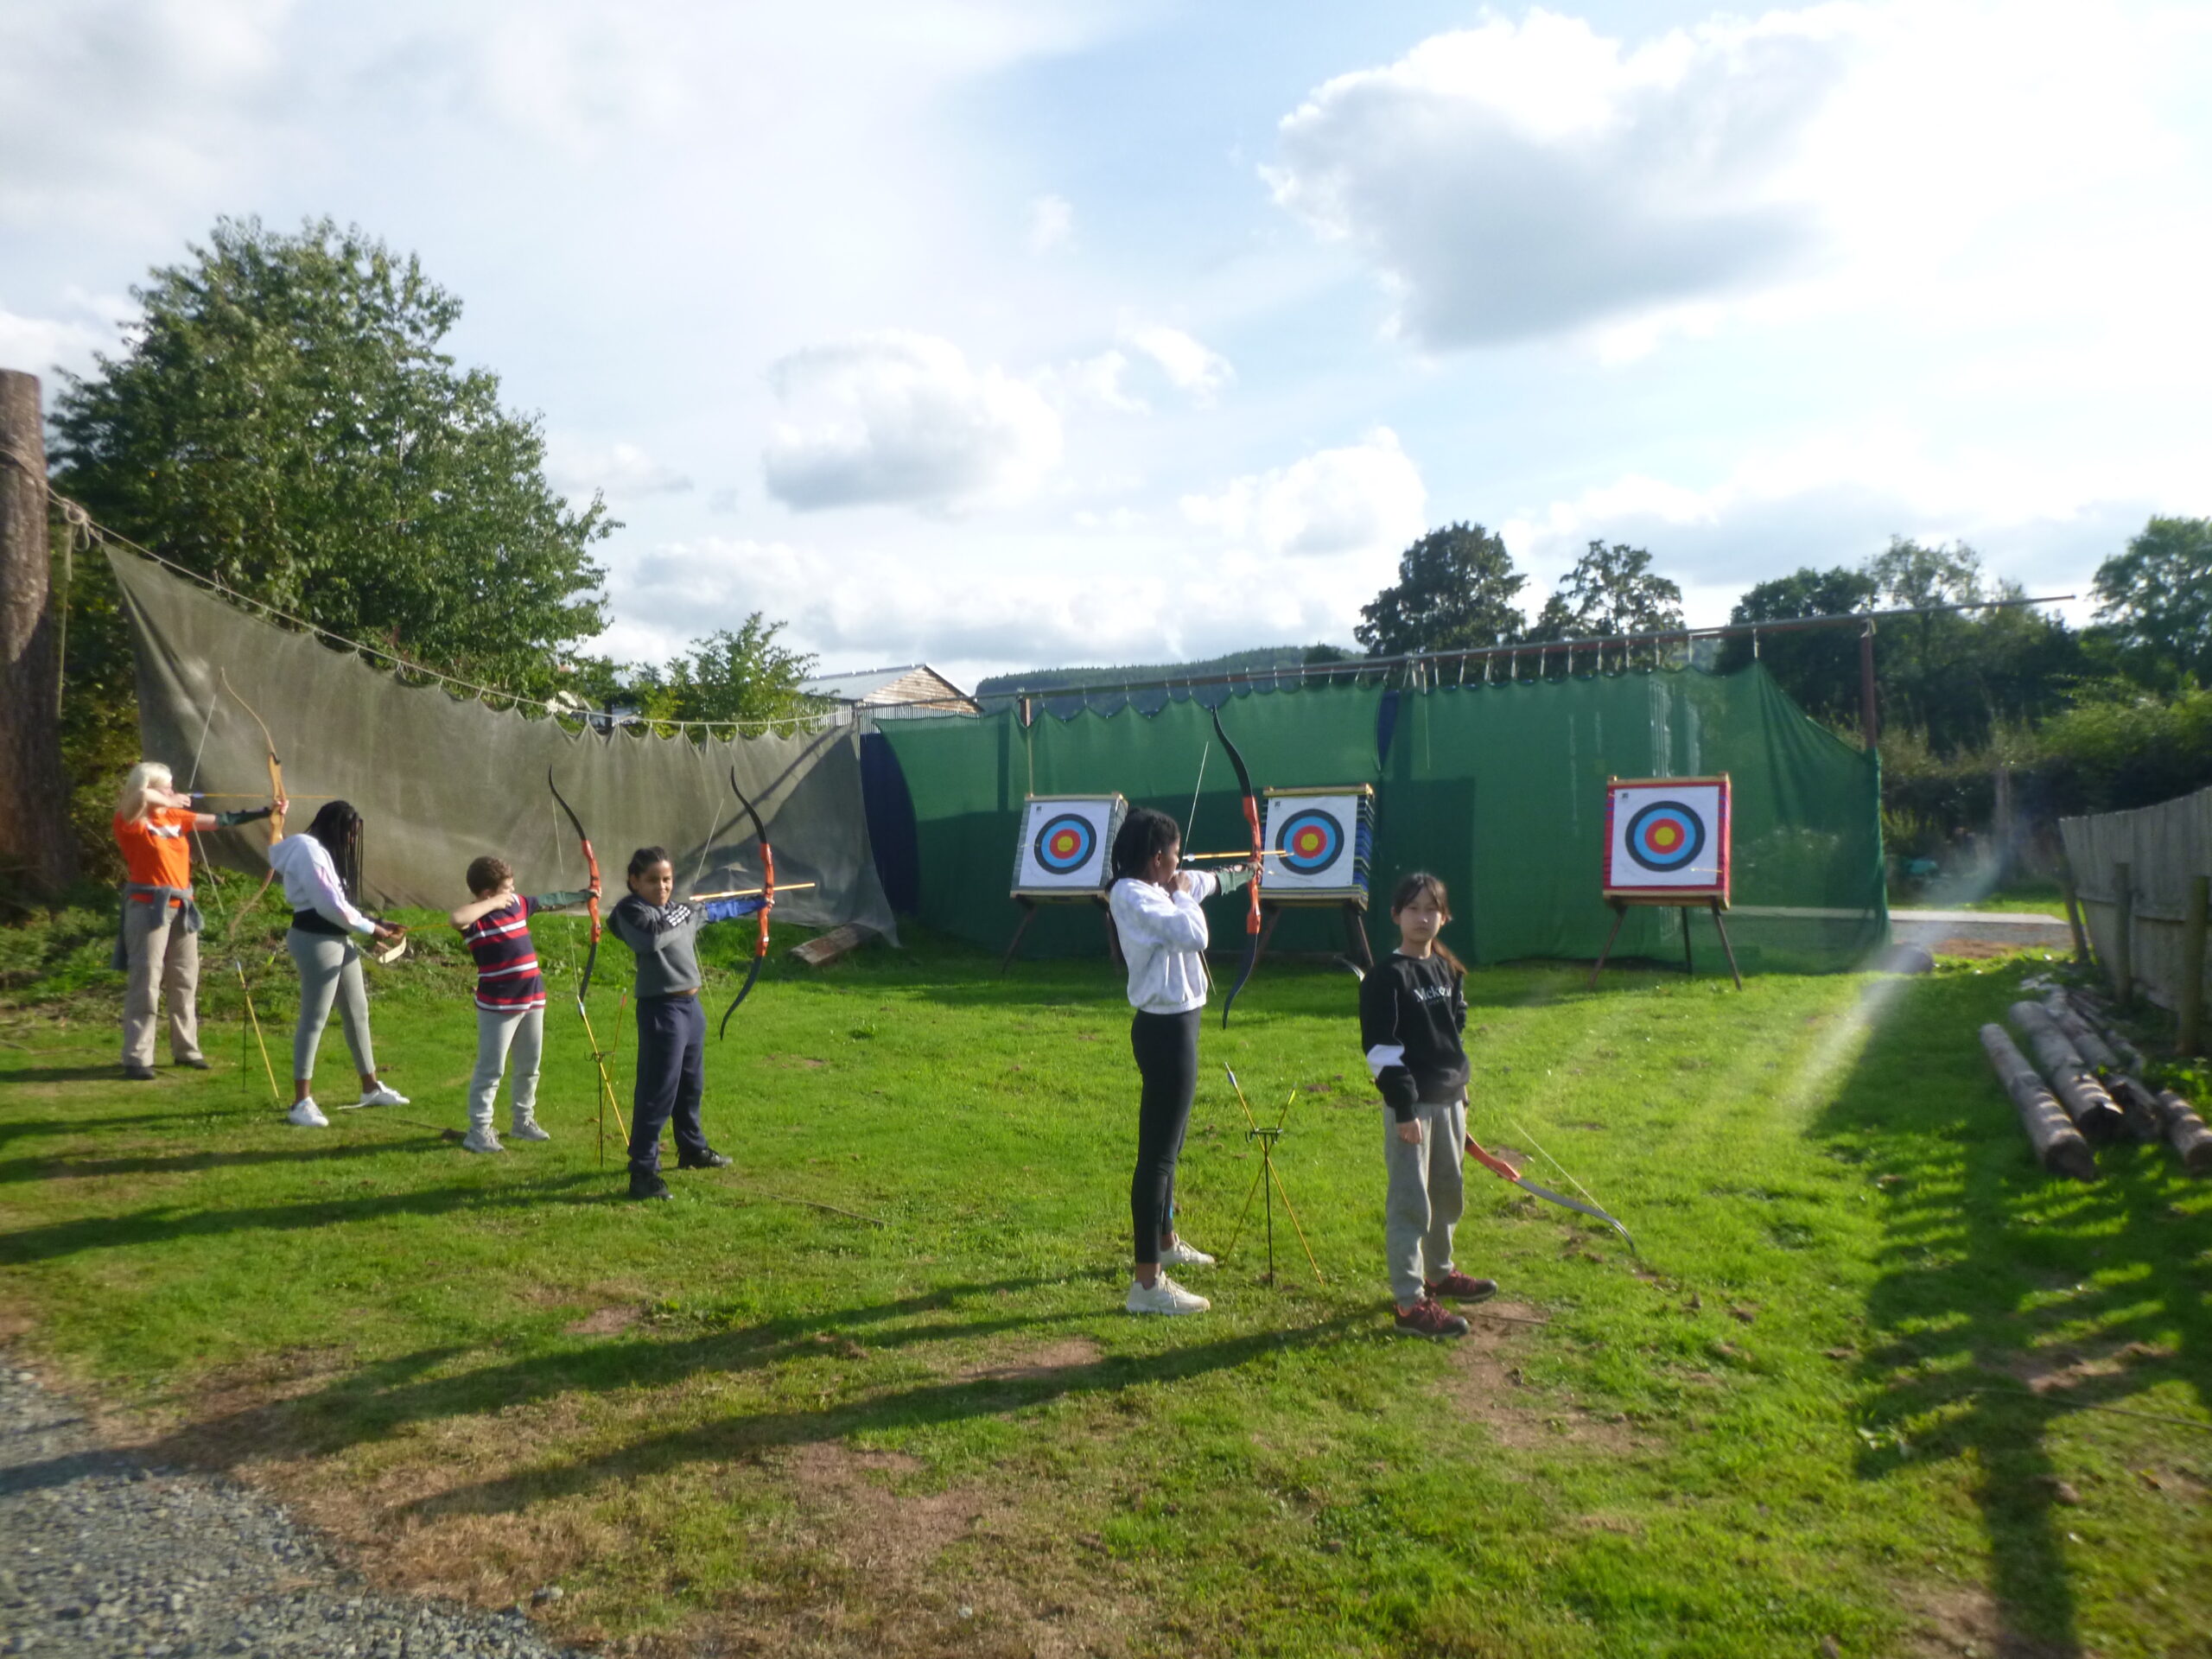 An archery session at Trewern